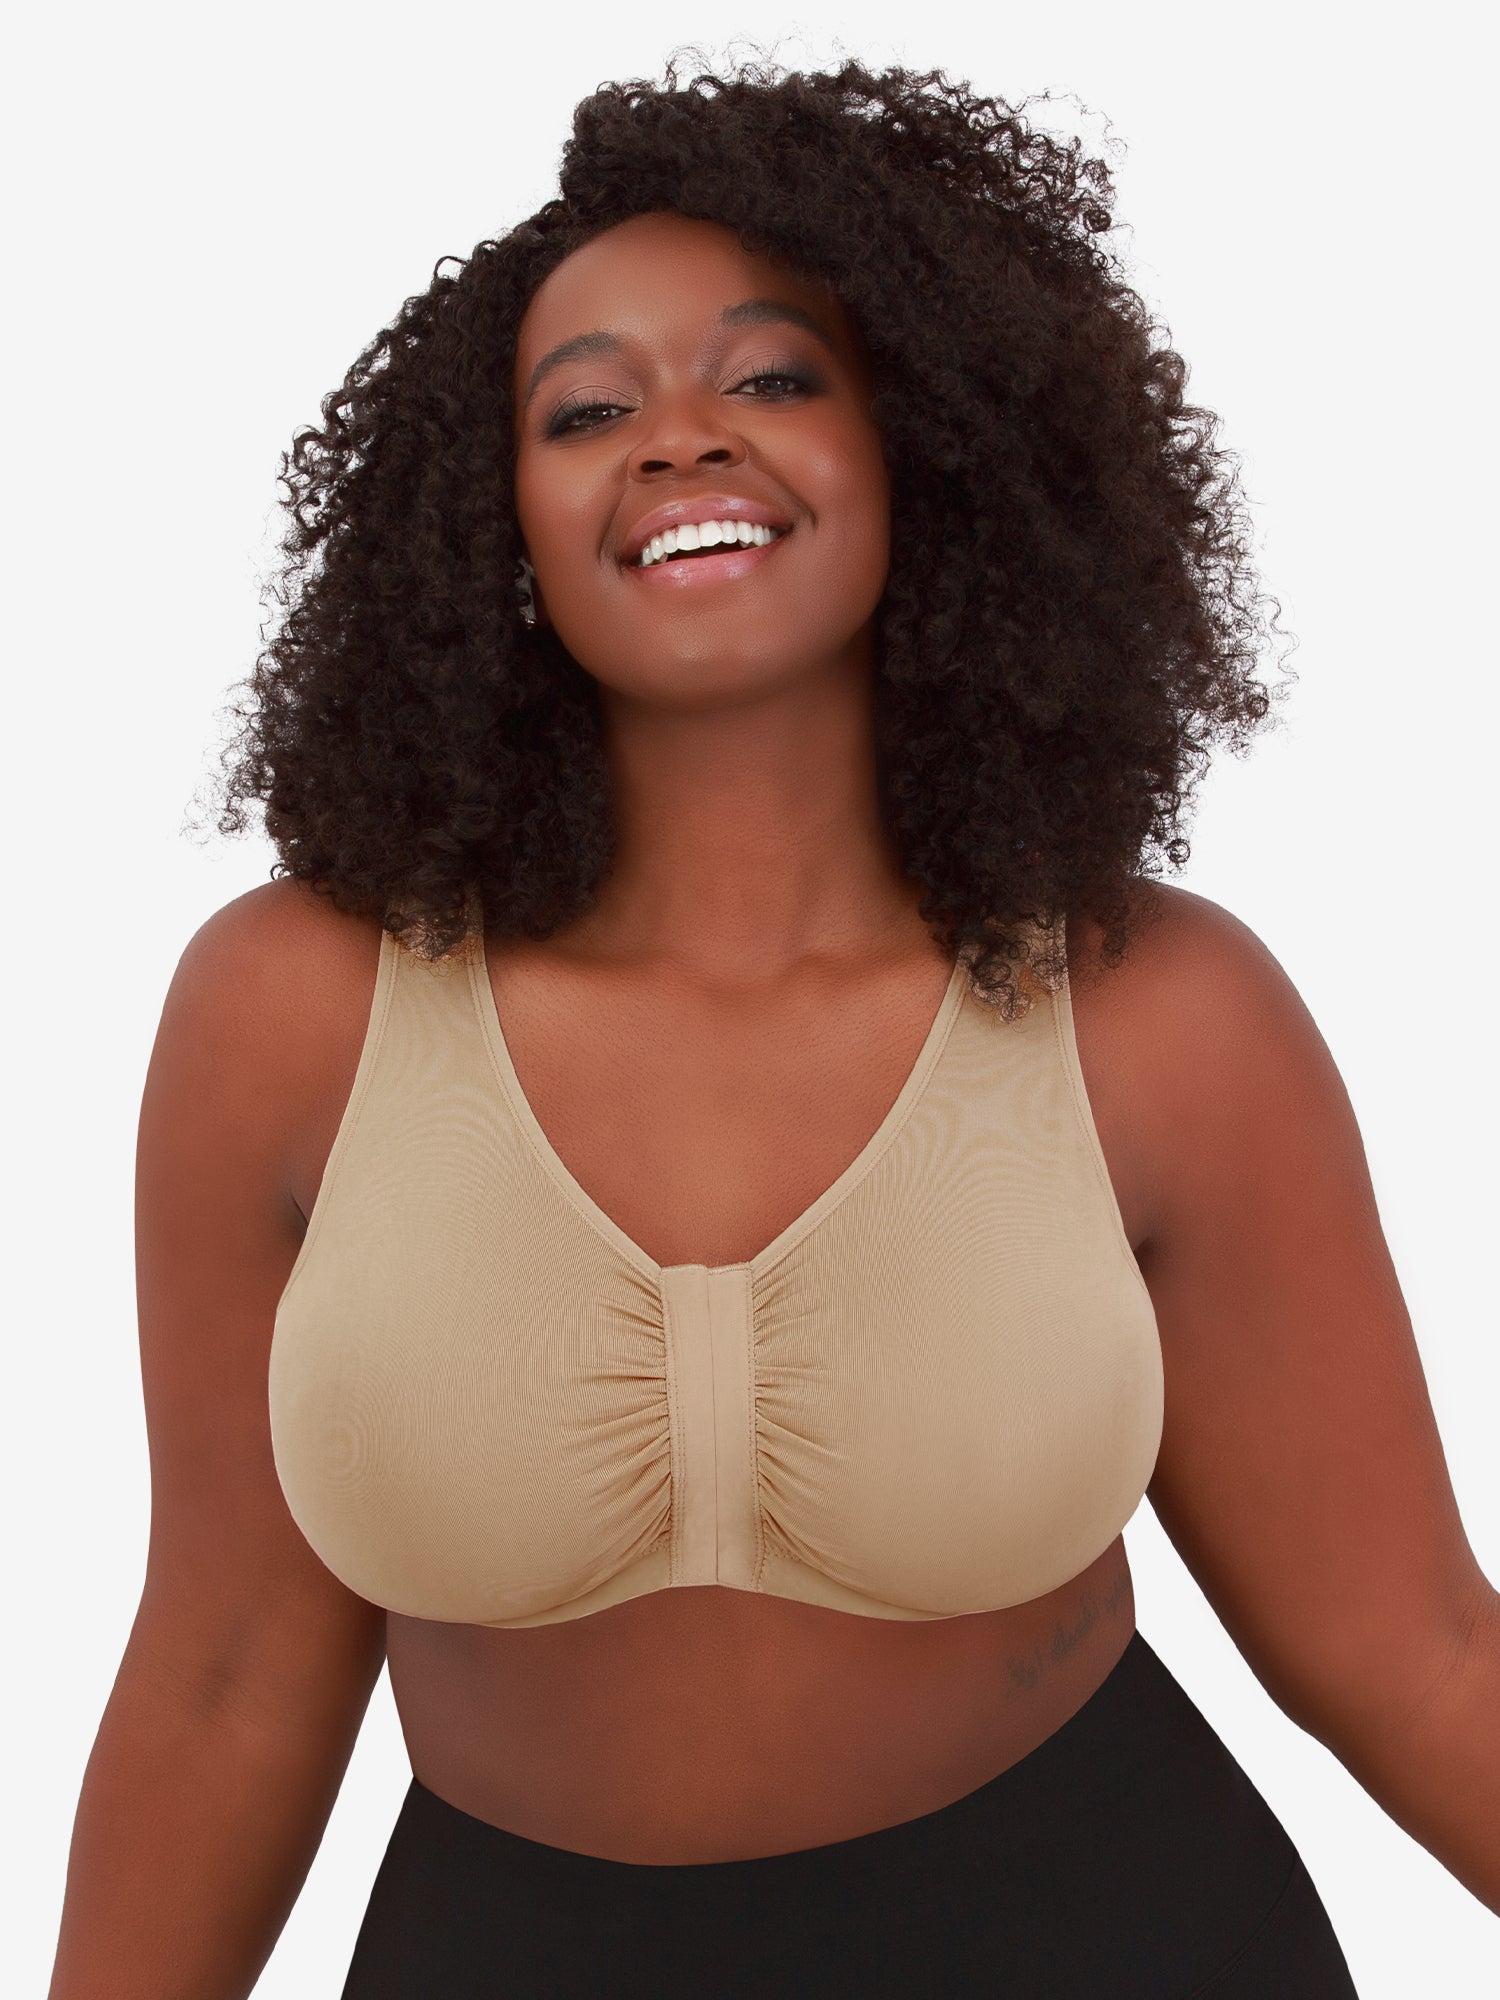 5530 - Leading Lady Inc.  Front closure bra, Support bras, Intimate bras